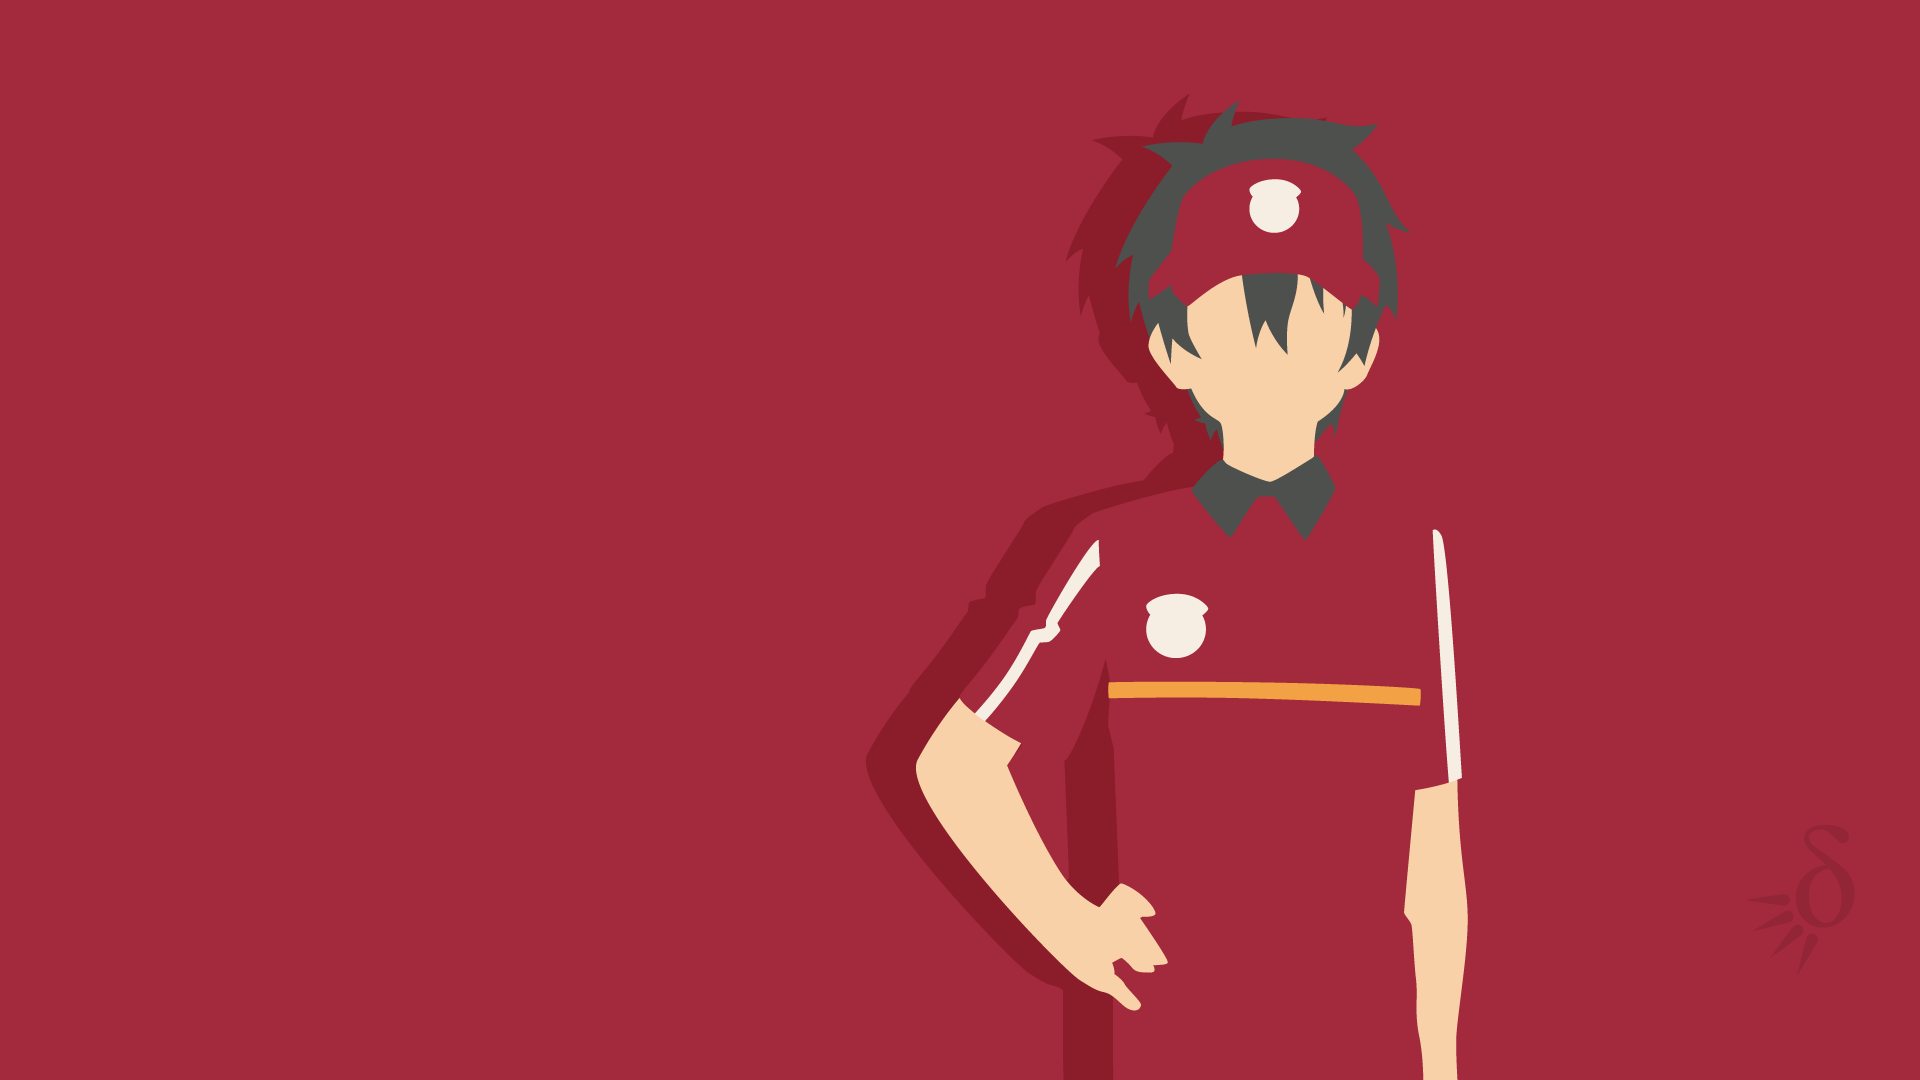 Maou-sama 君主 - The Devil Is a Part-Timer! wallpaper 😍